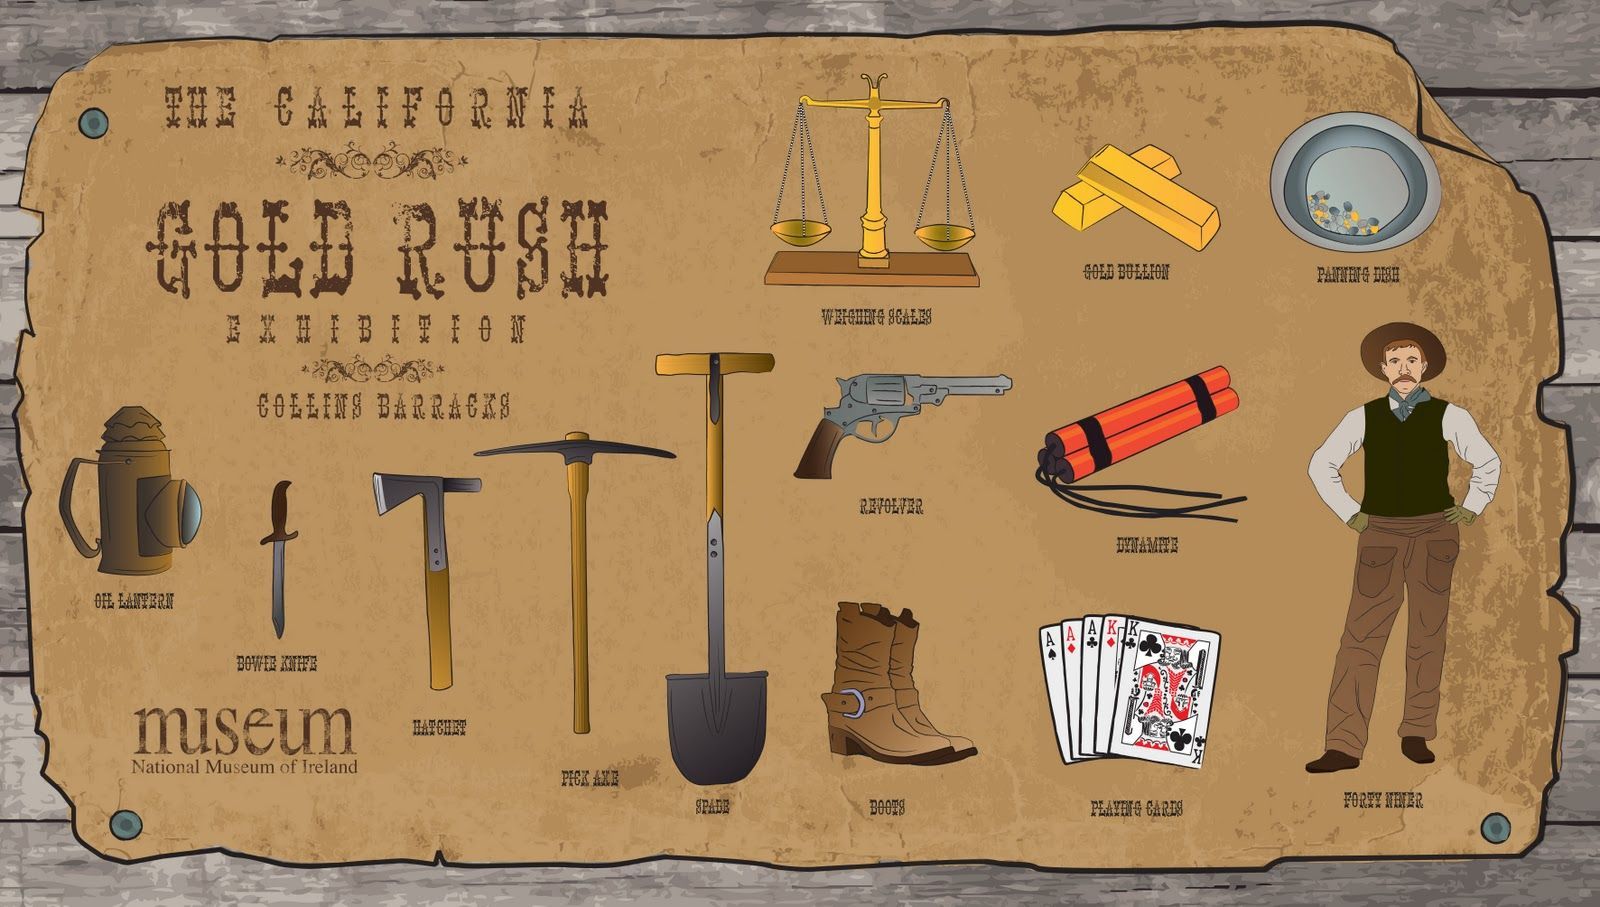 Correia Creative Design: Gold Rush. Gold rush projects, Gold rush activities, Gold rush